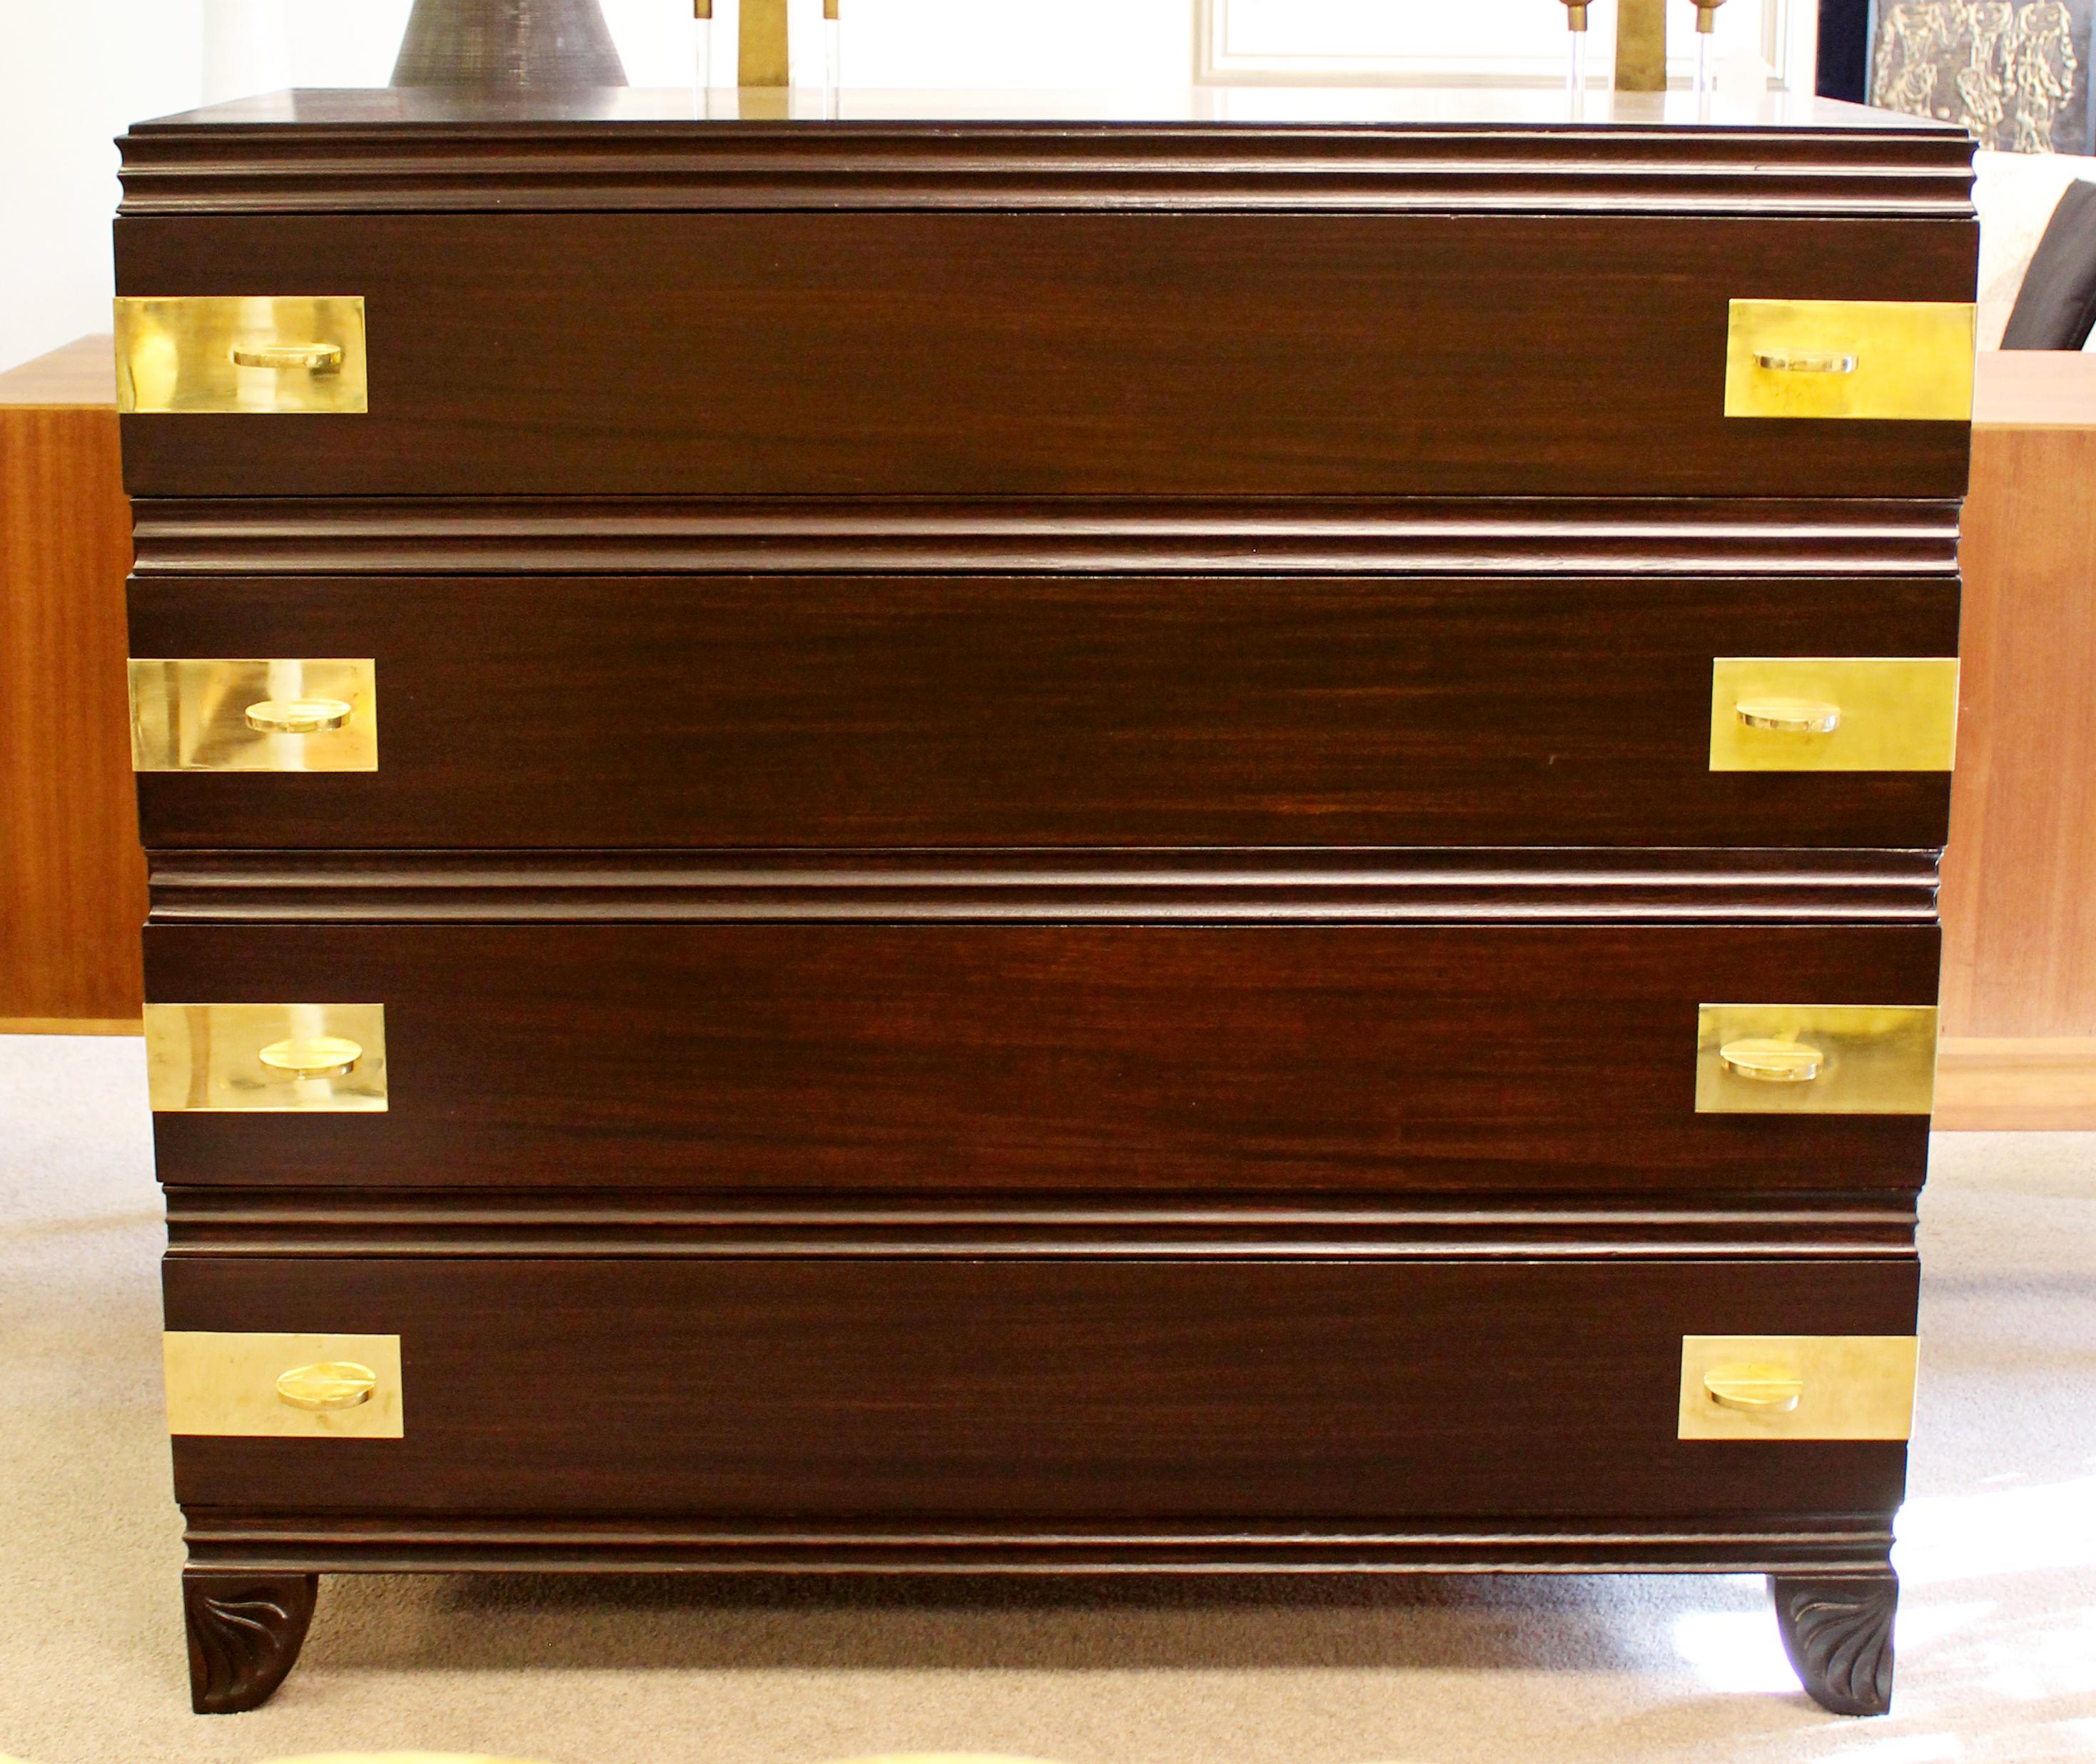 For your consideration is an incredible, ebonized mahogany, four drawer chest dresser, with brass pulls, by John Widdicomb, circa 1938. In excellent condition, newly restored. The dimensions are 43.5 W x 21